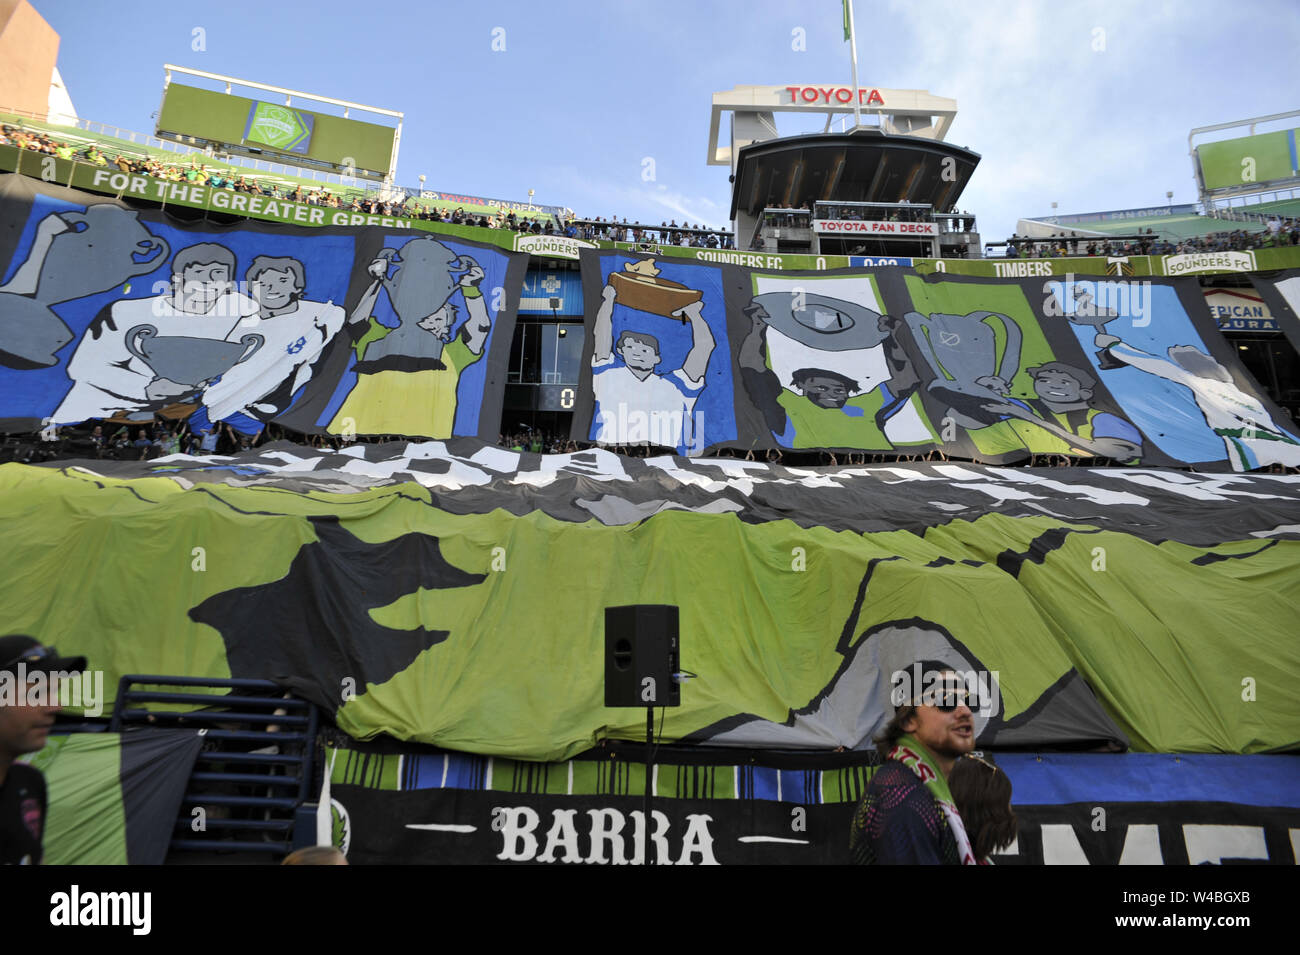 Seattle, WA, USA. 21st July, 2019. MLS Soccer 2019: The Emerald City Supporters show their support with a giant Tifo at the start of a Western Conference MLS match between the Portland Timbers and the Seattle Sounders at Century Link Field in Seattle, WA. Credit: Jeff Halstead/ZUMA Wire/Alamy Live News Stock Photo